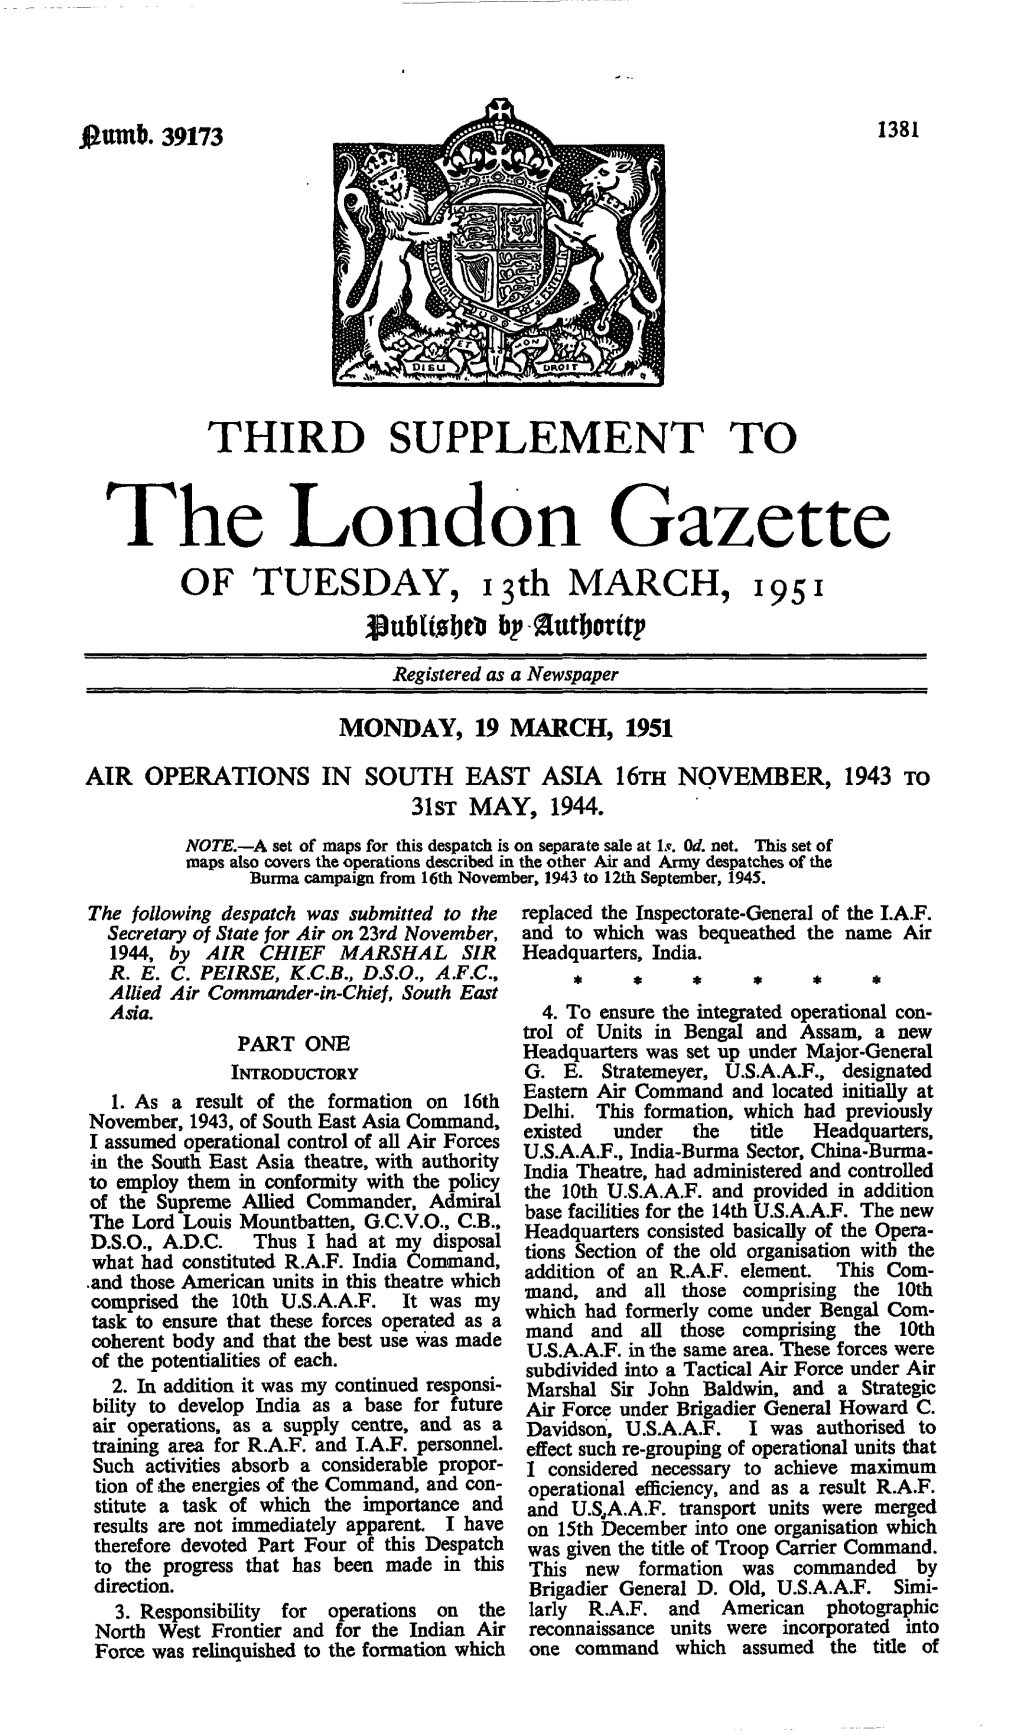 The London Gazette of TUESDAY, I3th MARCH, 1951